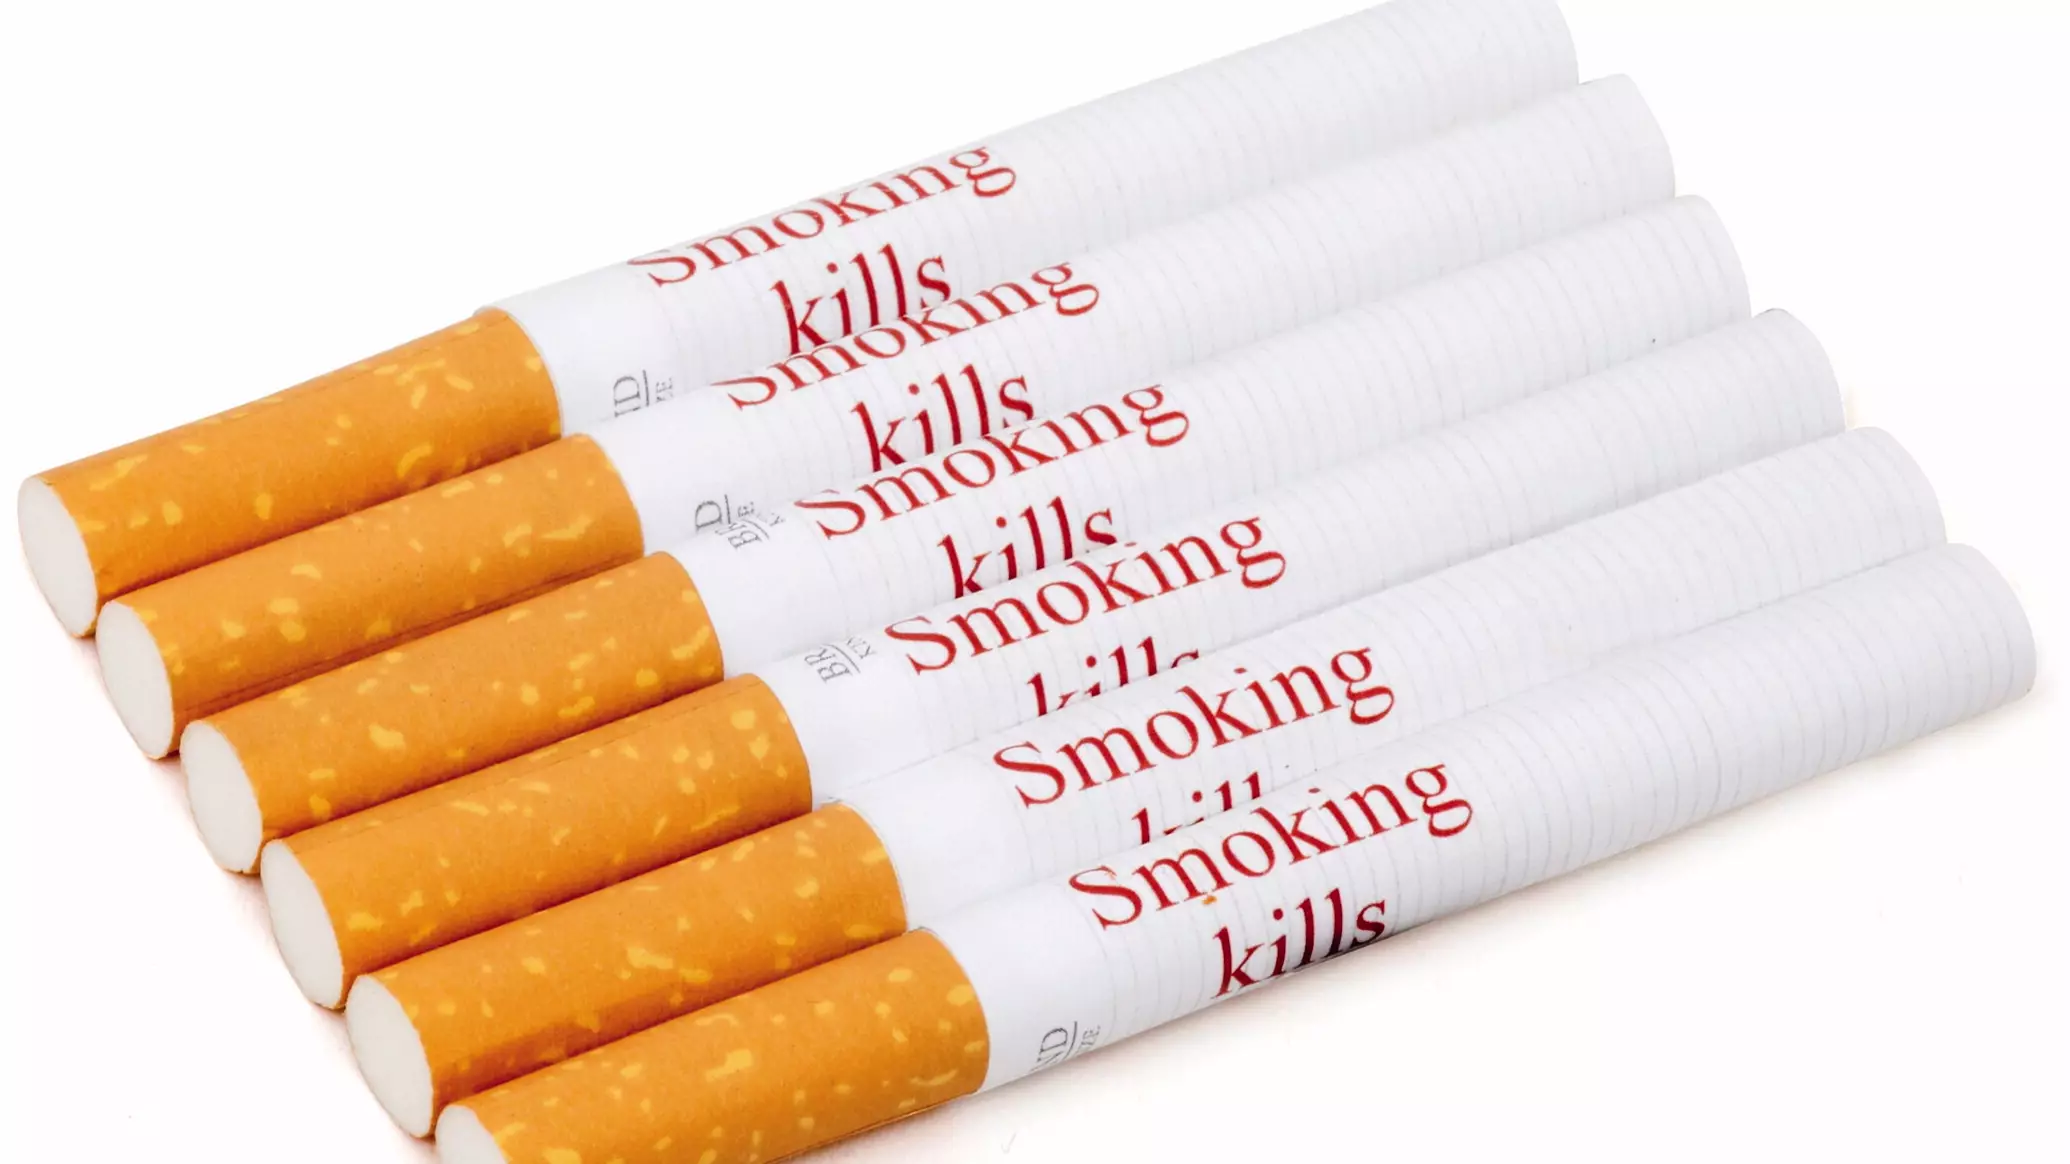 Plans For Health Warnings To Be Displayed On Individual Cigarettes